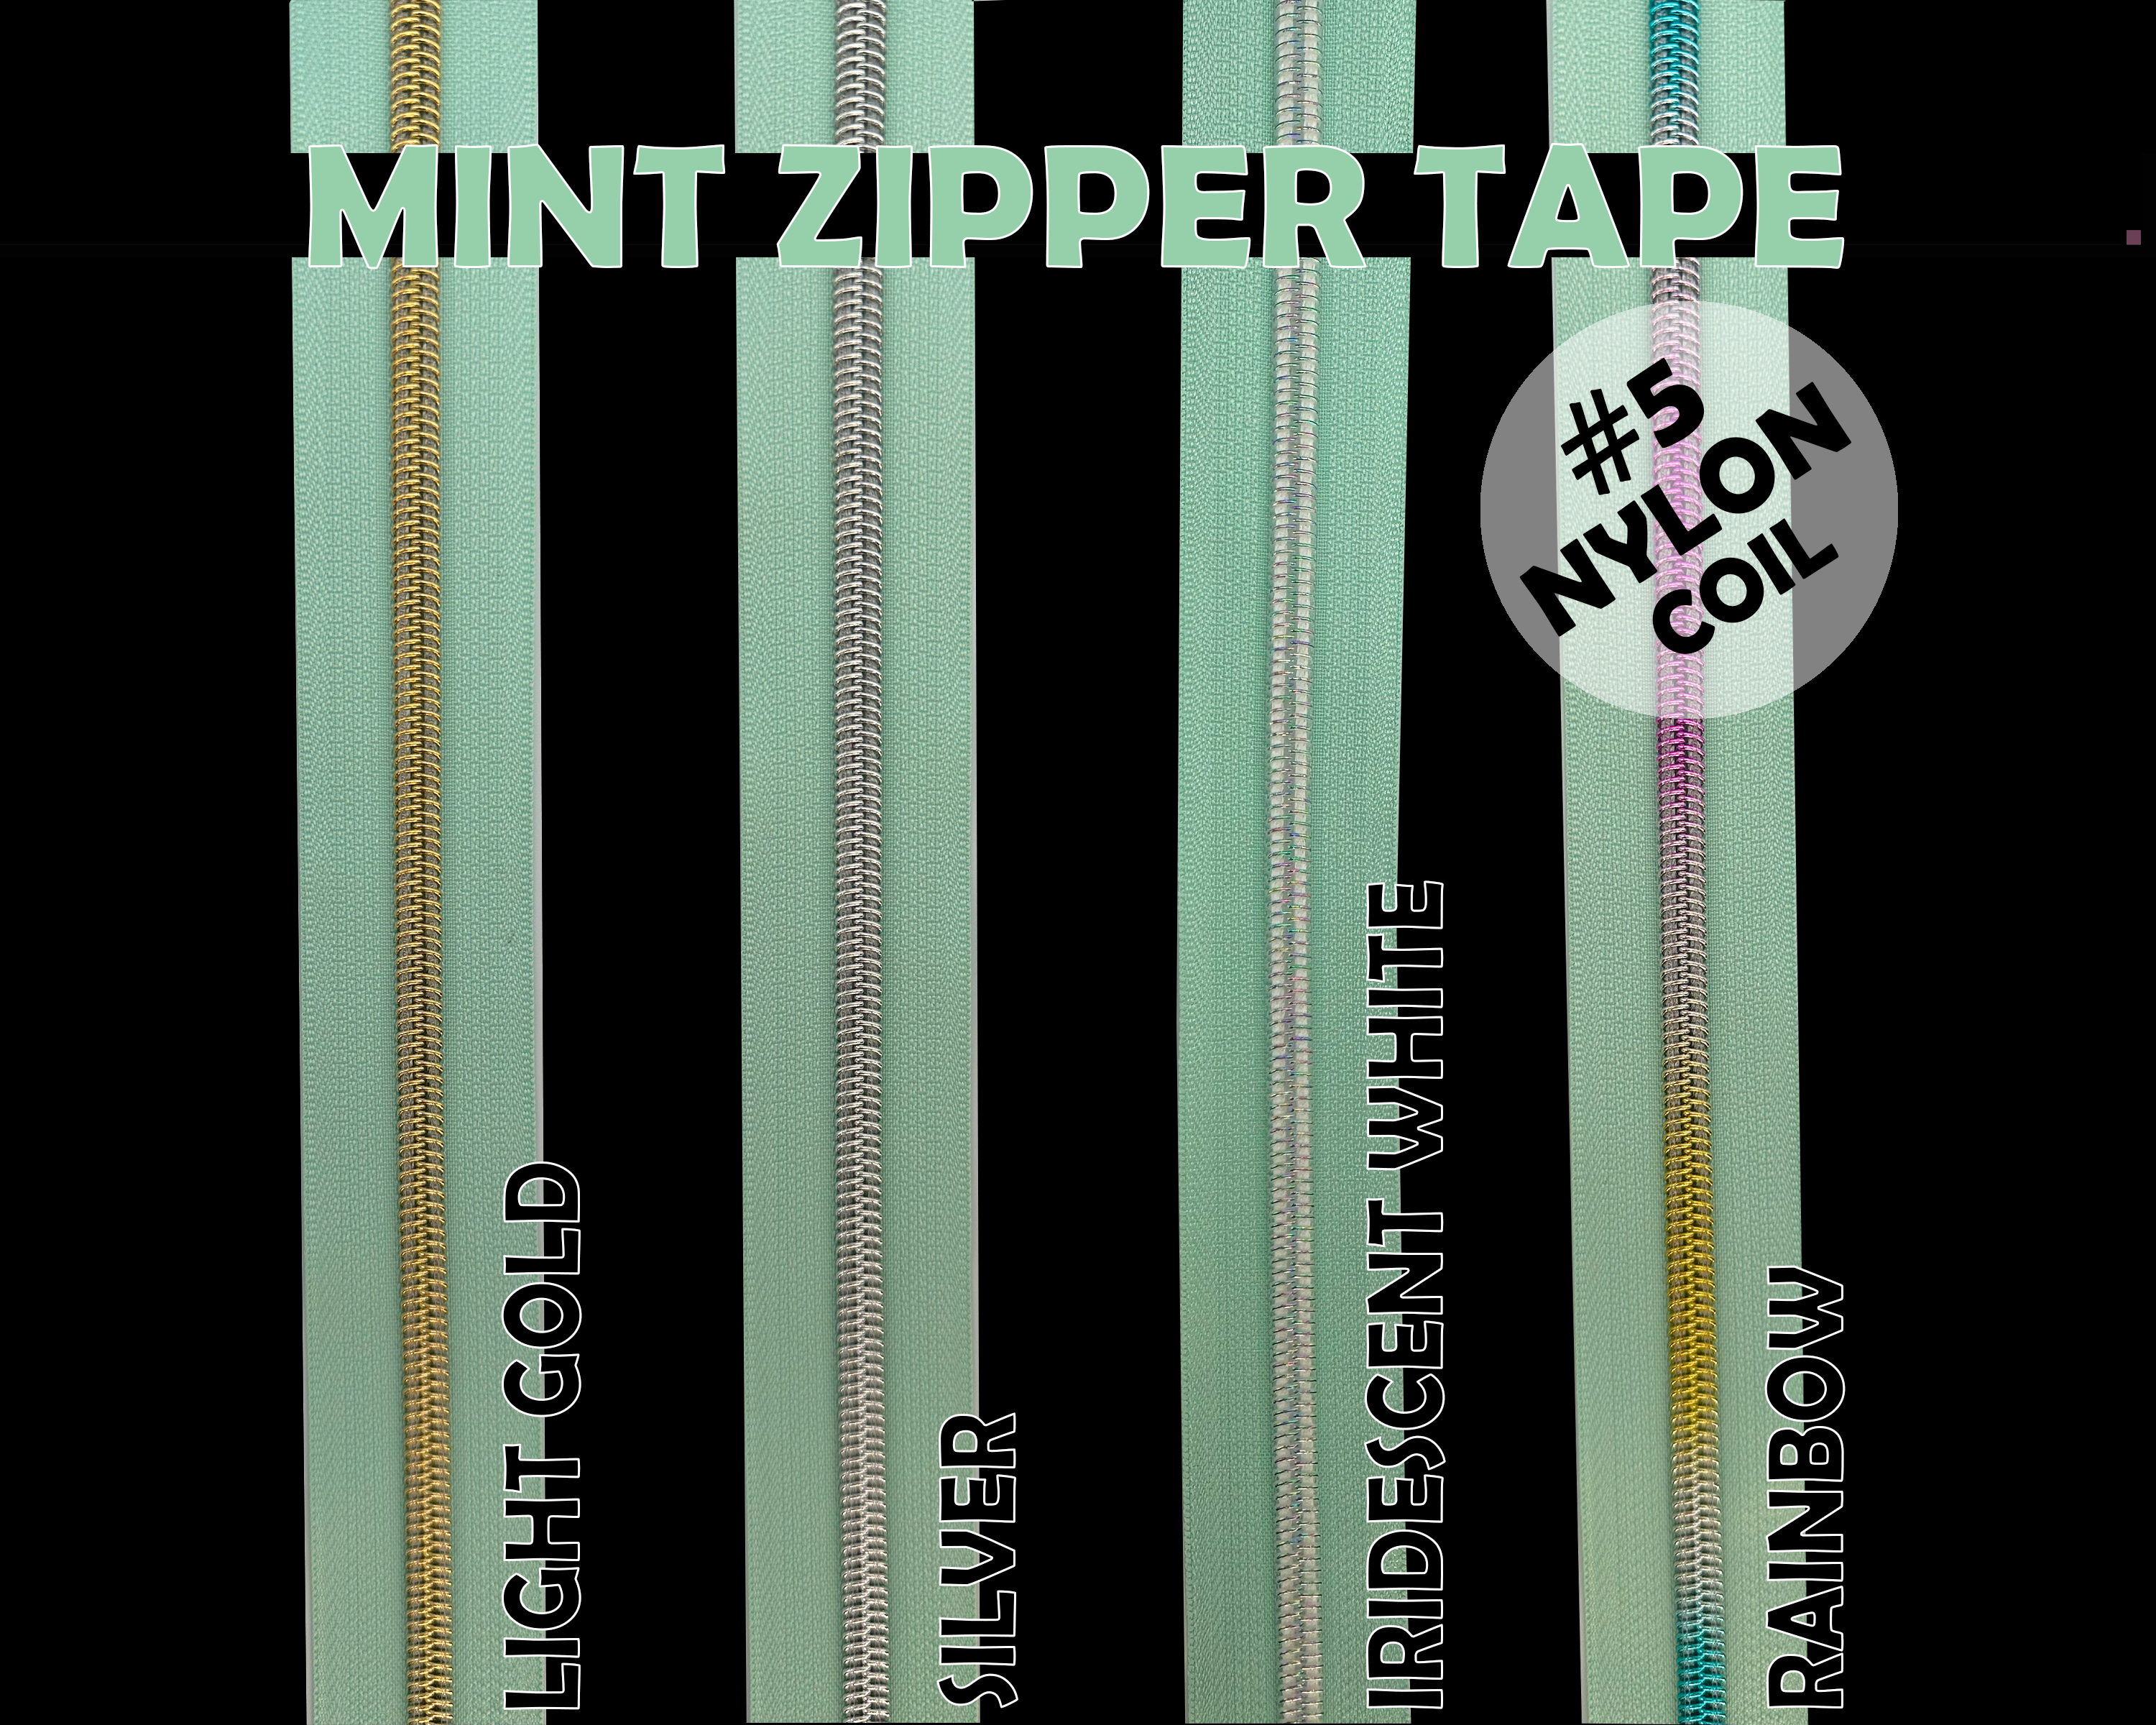 Mint Zipper Tape, Size 5 Nylon Coil with various coloured teeth